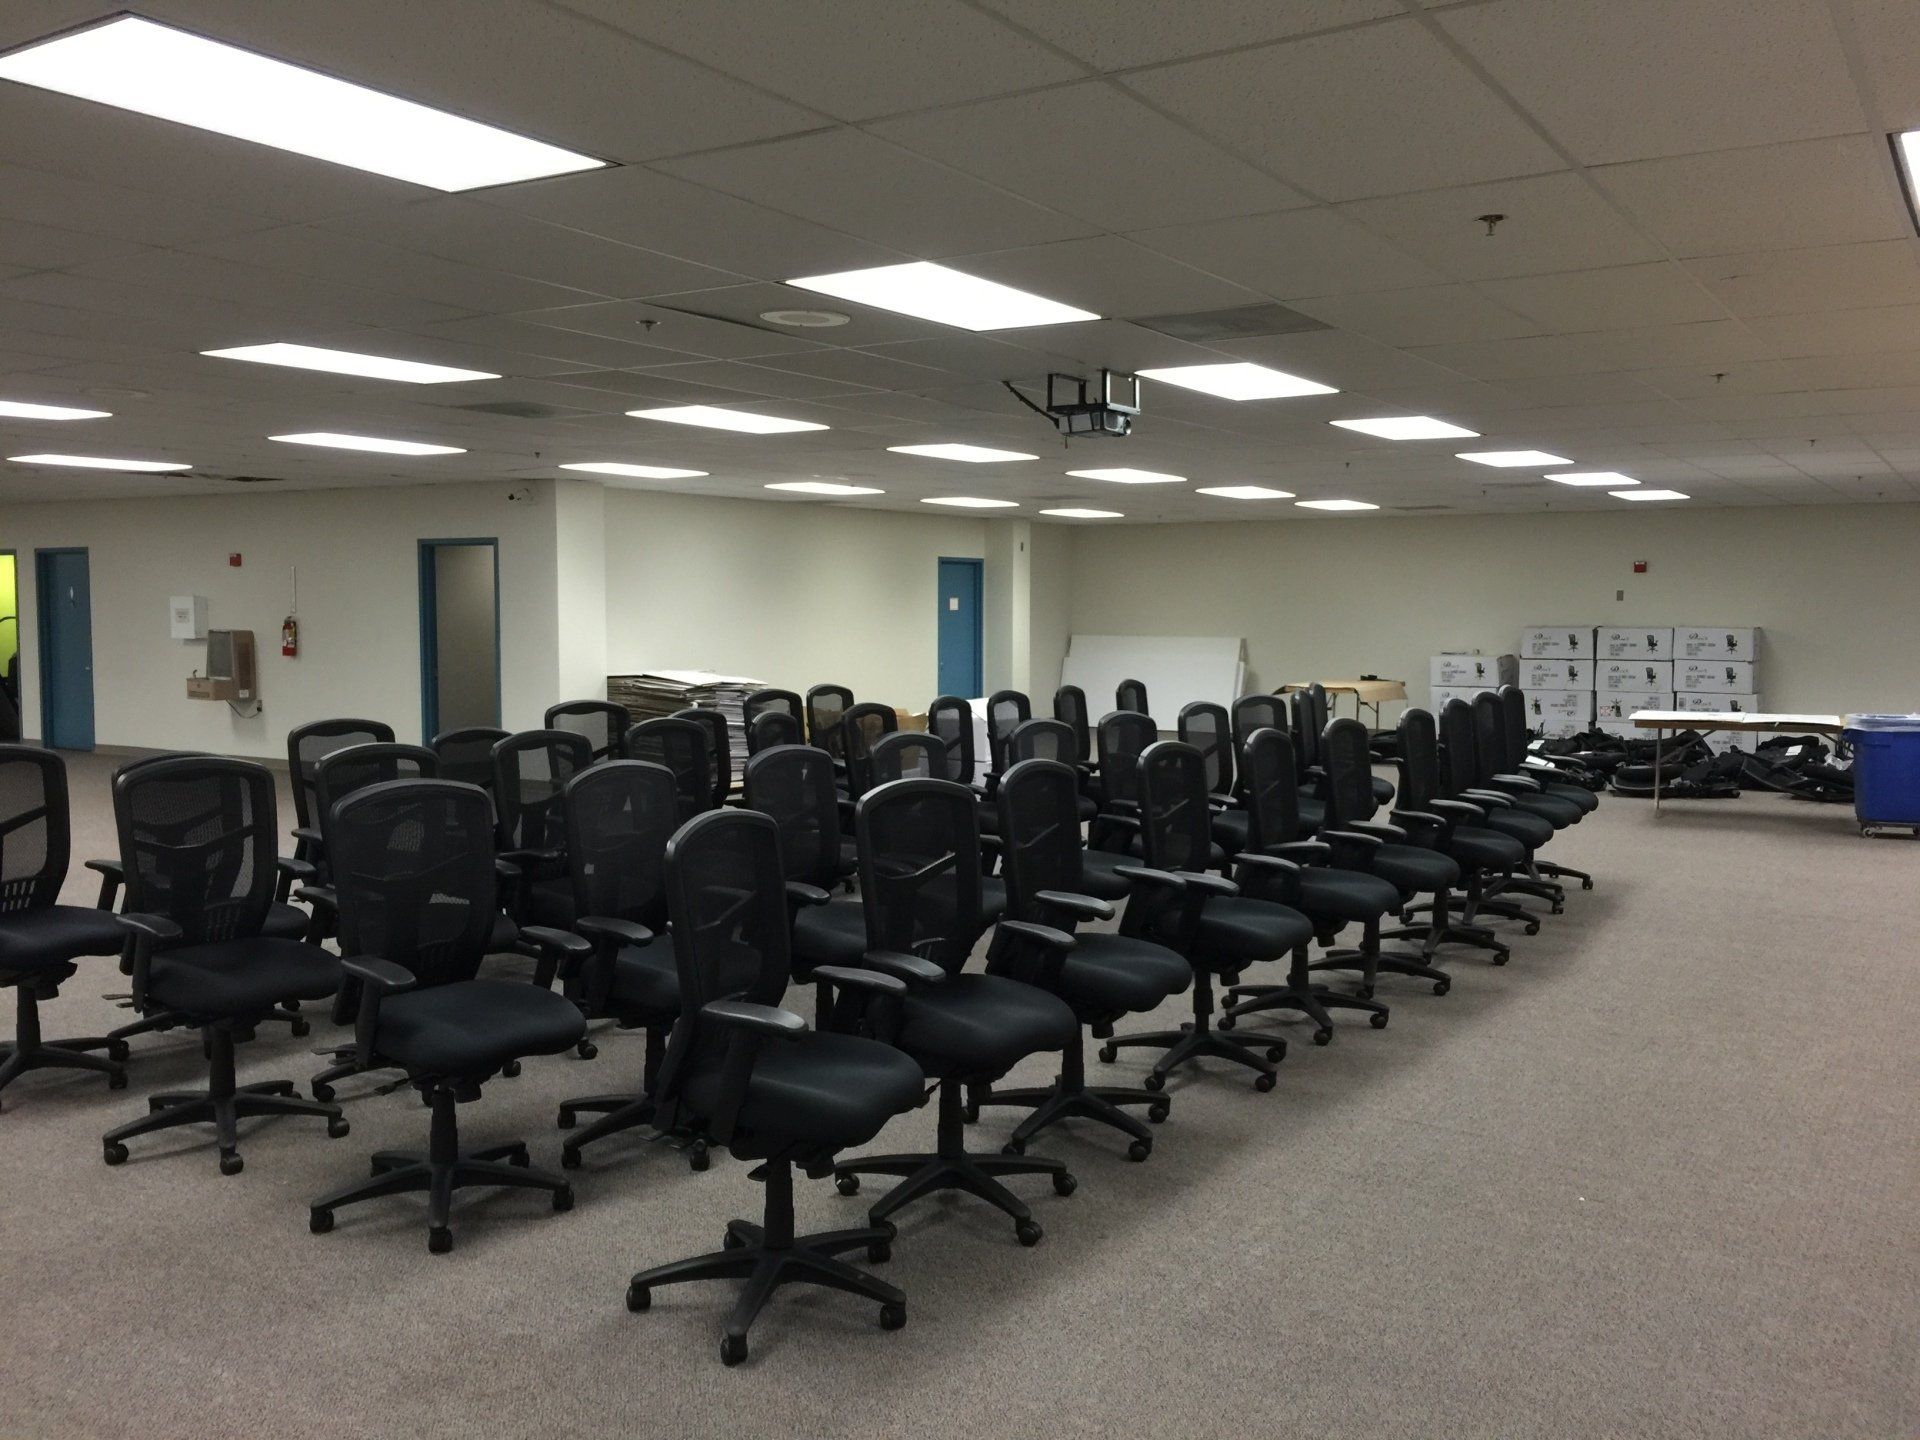 Numerous assembled office rolling chairs